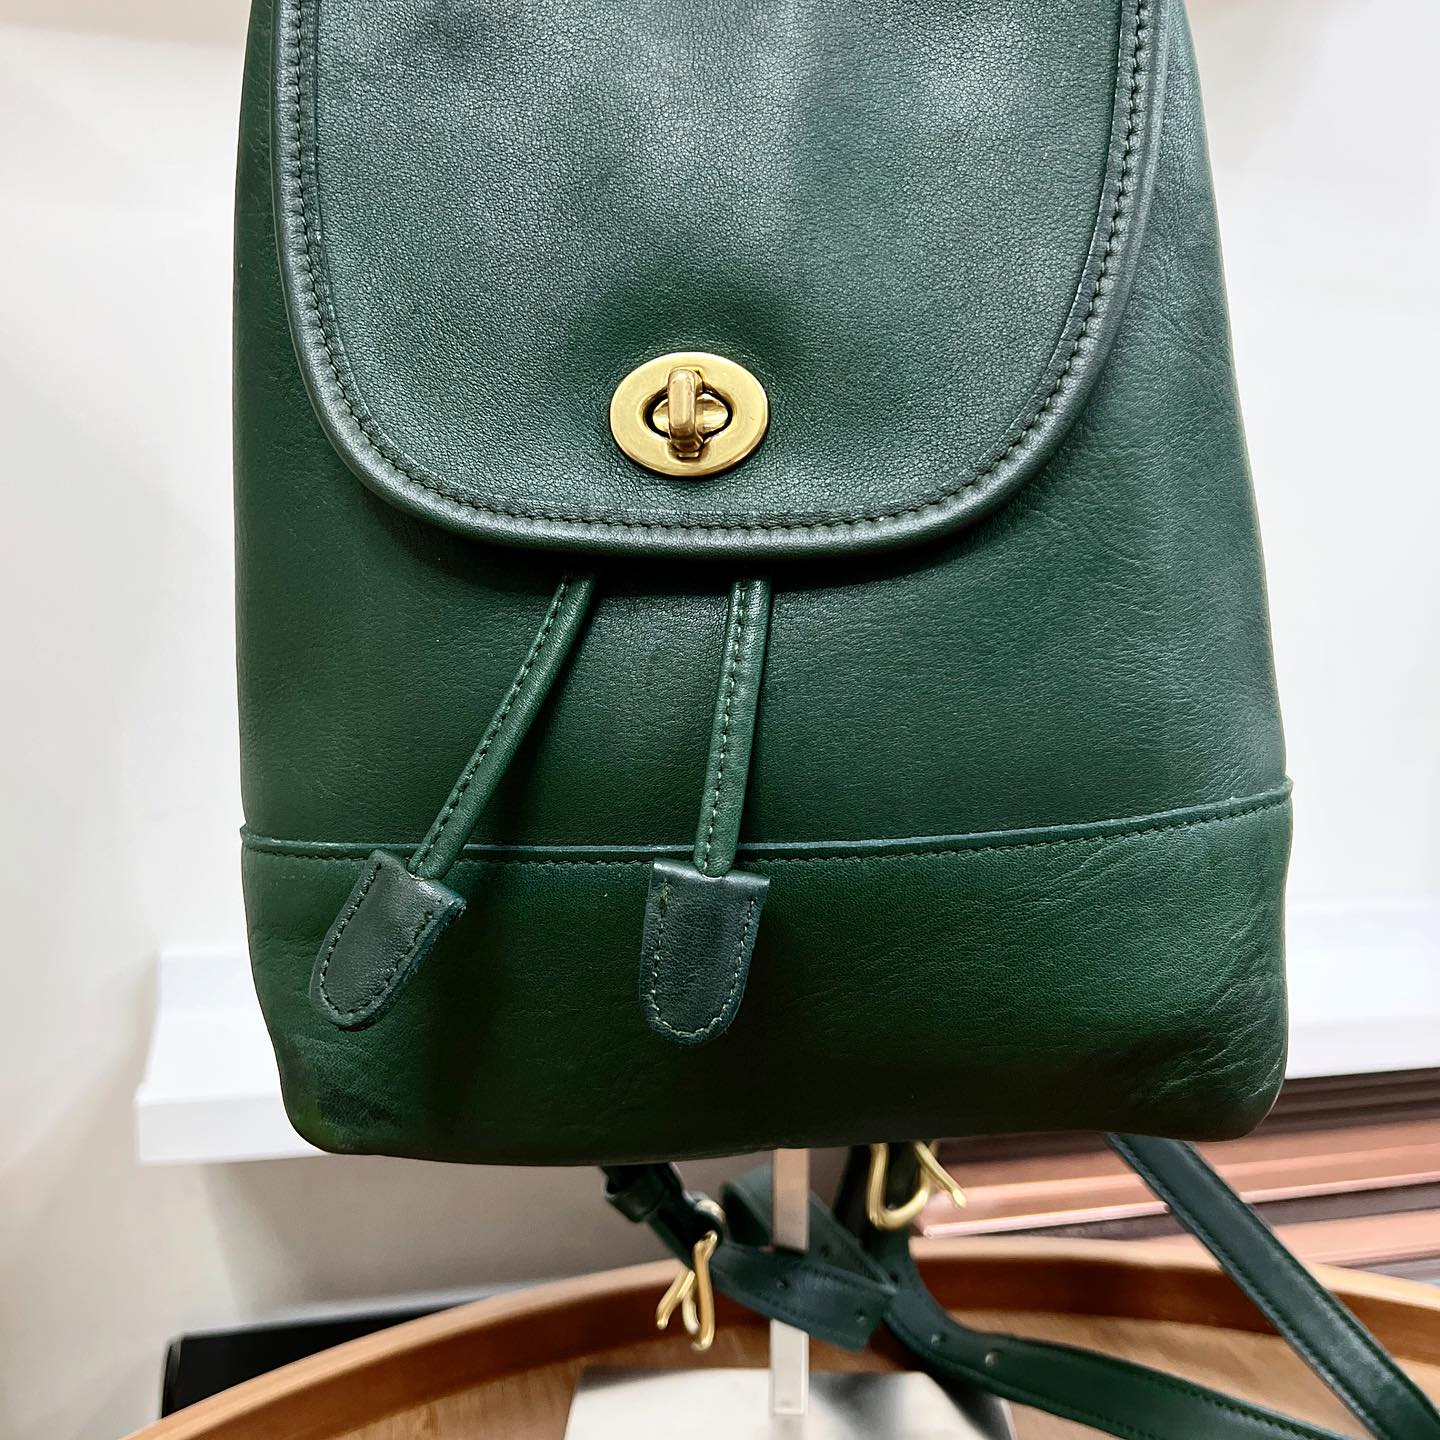 Coach Leather Backpack 真皮背囊